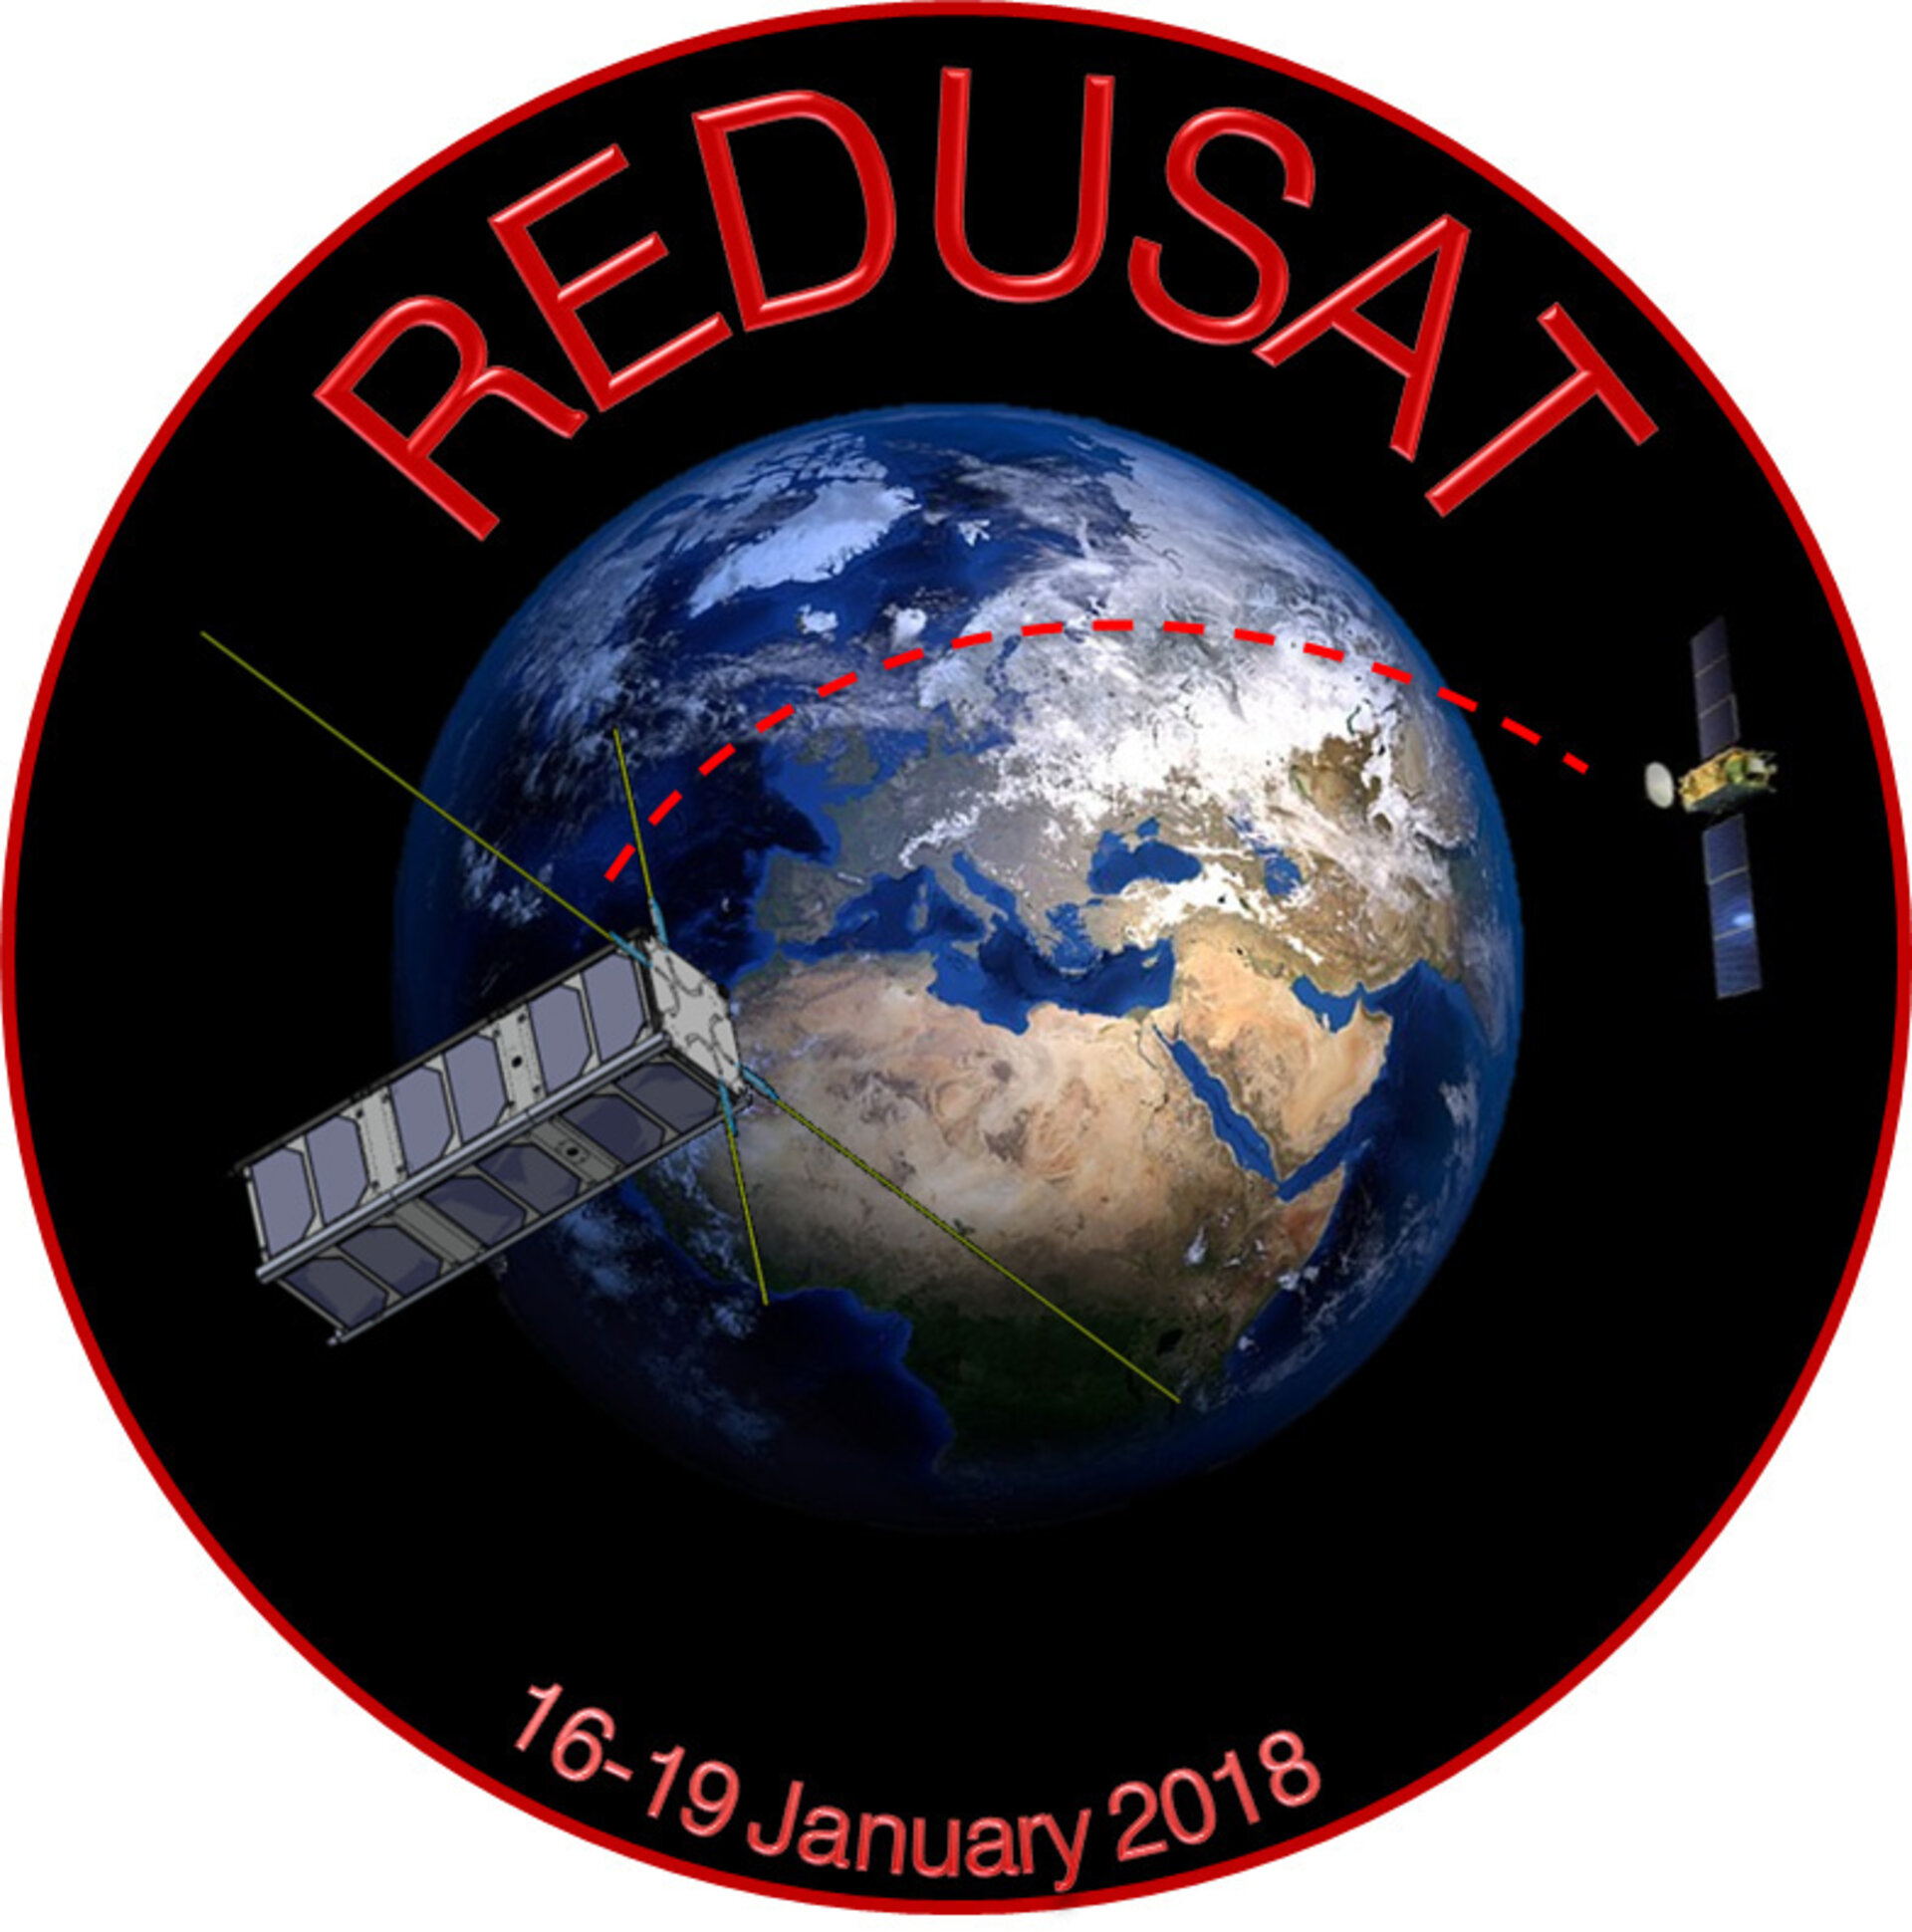 A mission patch designed by the REDUSAT team